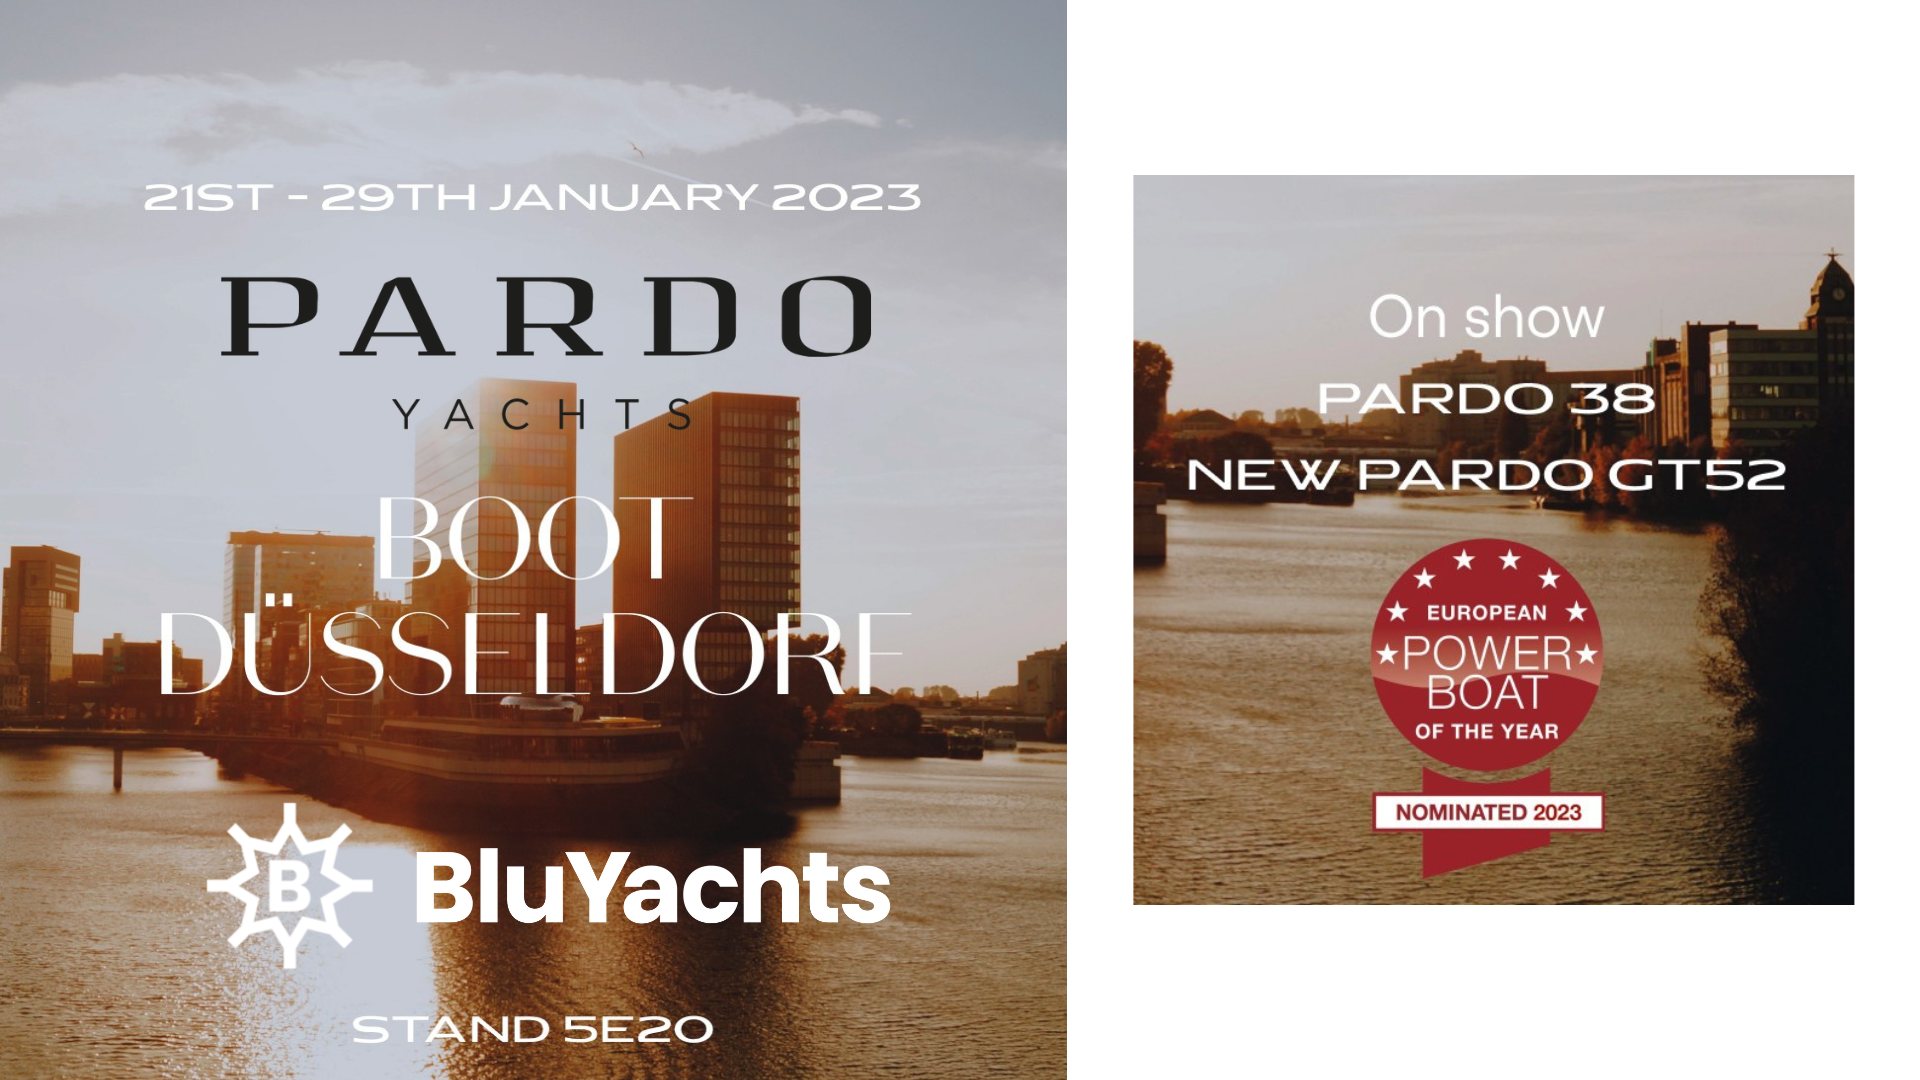 Come and visit us at the PARDO YACHTS stand 5E20